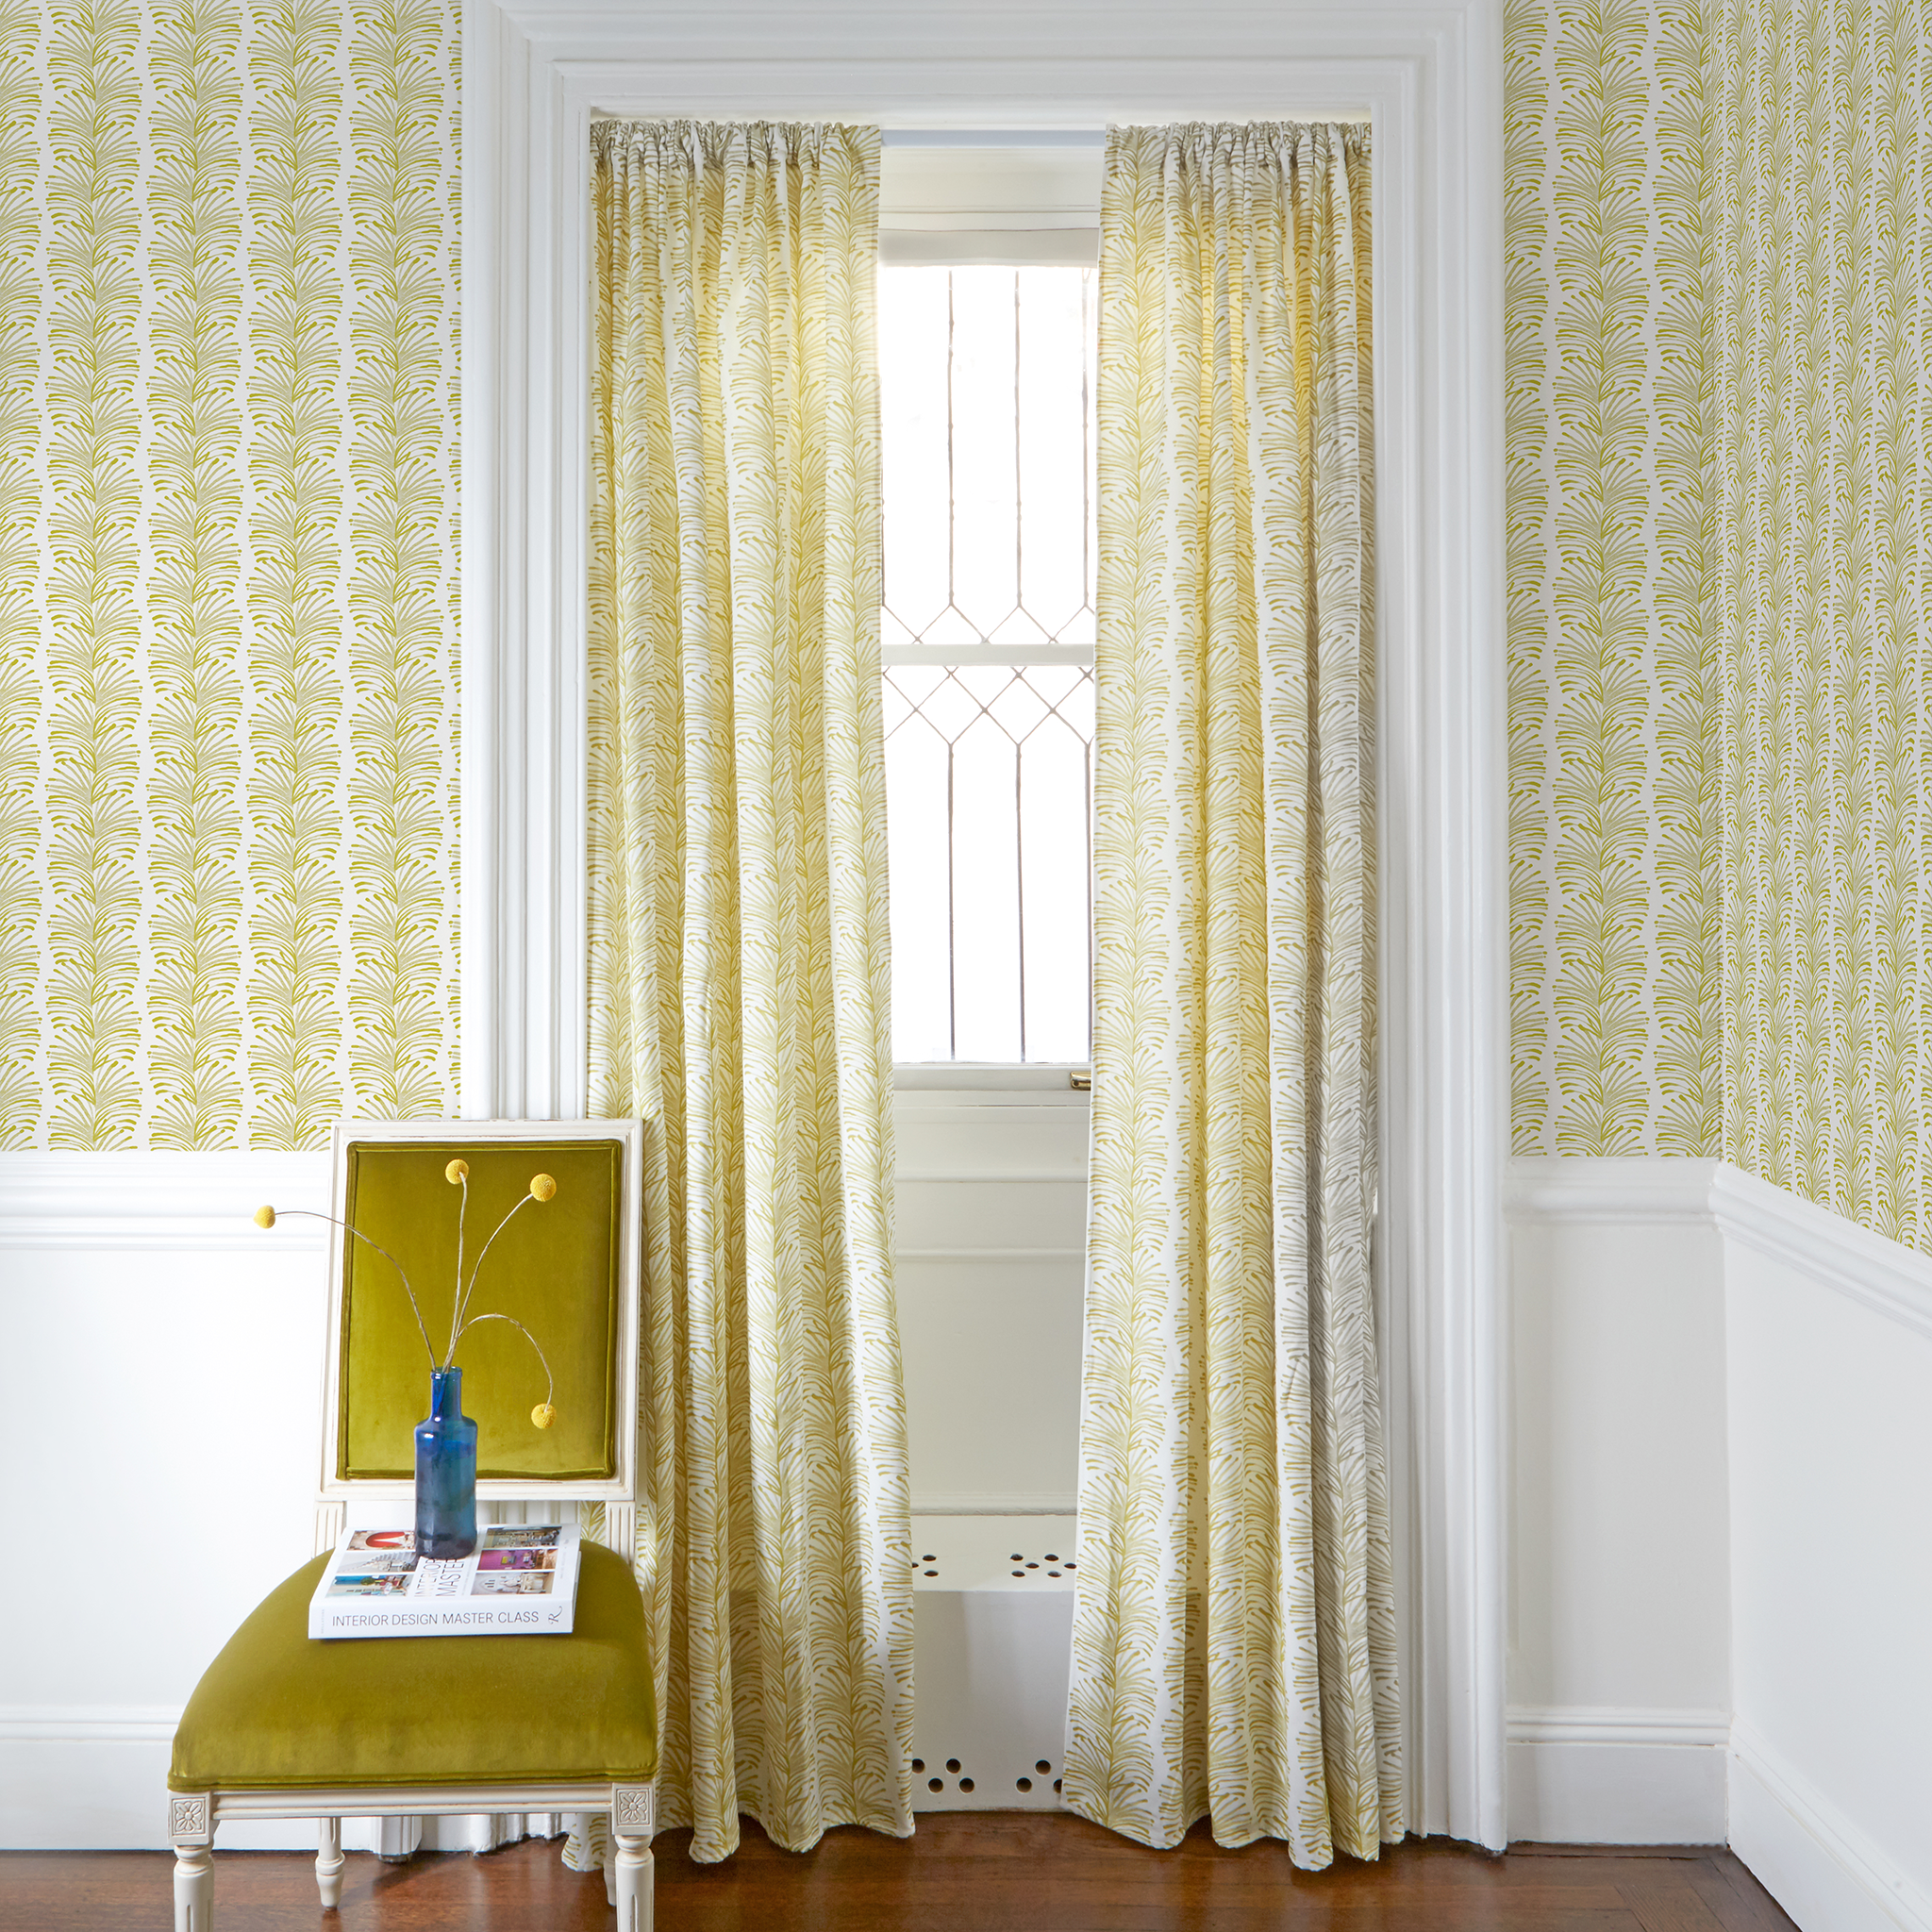 Yellow Stripe Chartreuse Printed Curtains on white rod with Yellow Stripe Chartreuse Printed Wallpaper in front of an illuminated window with Mustard Yellow Velvet chair with plants in blue clear vase on top of white book 